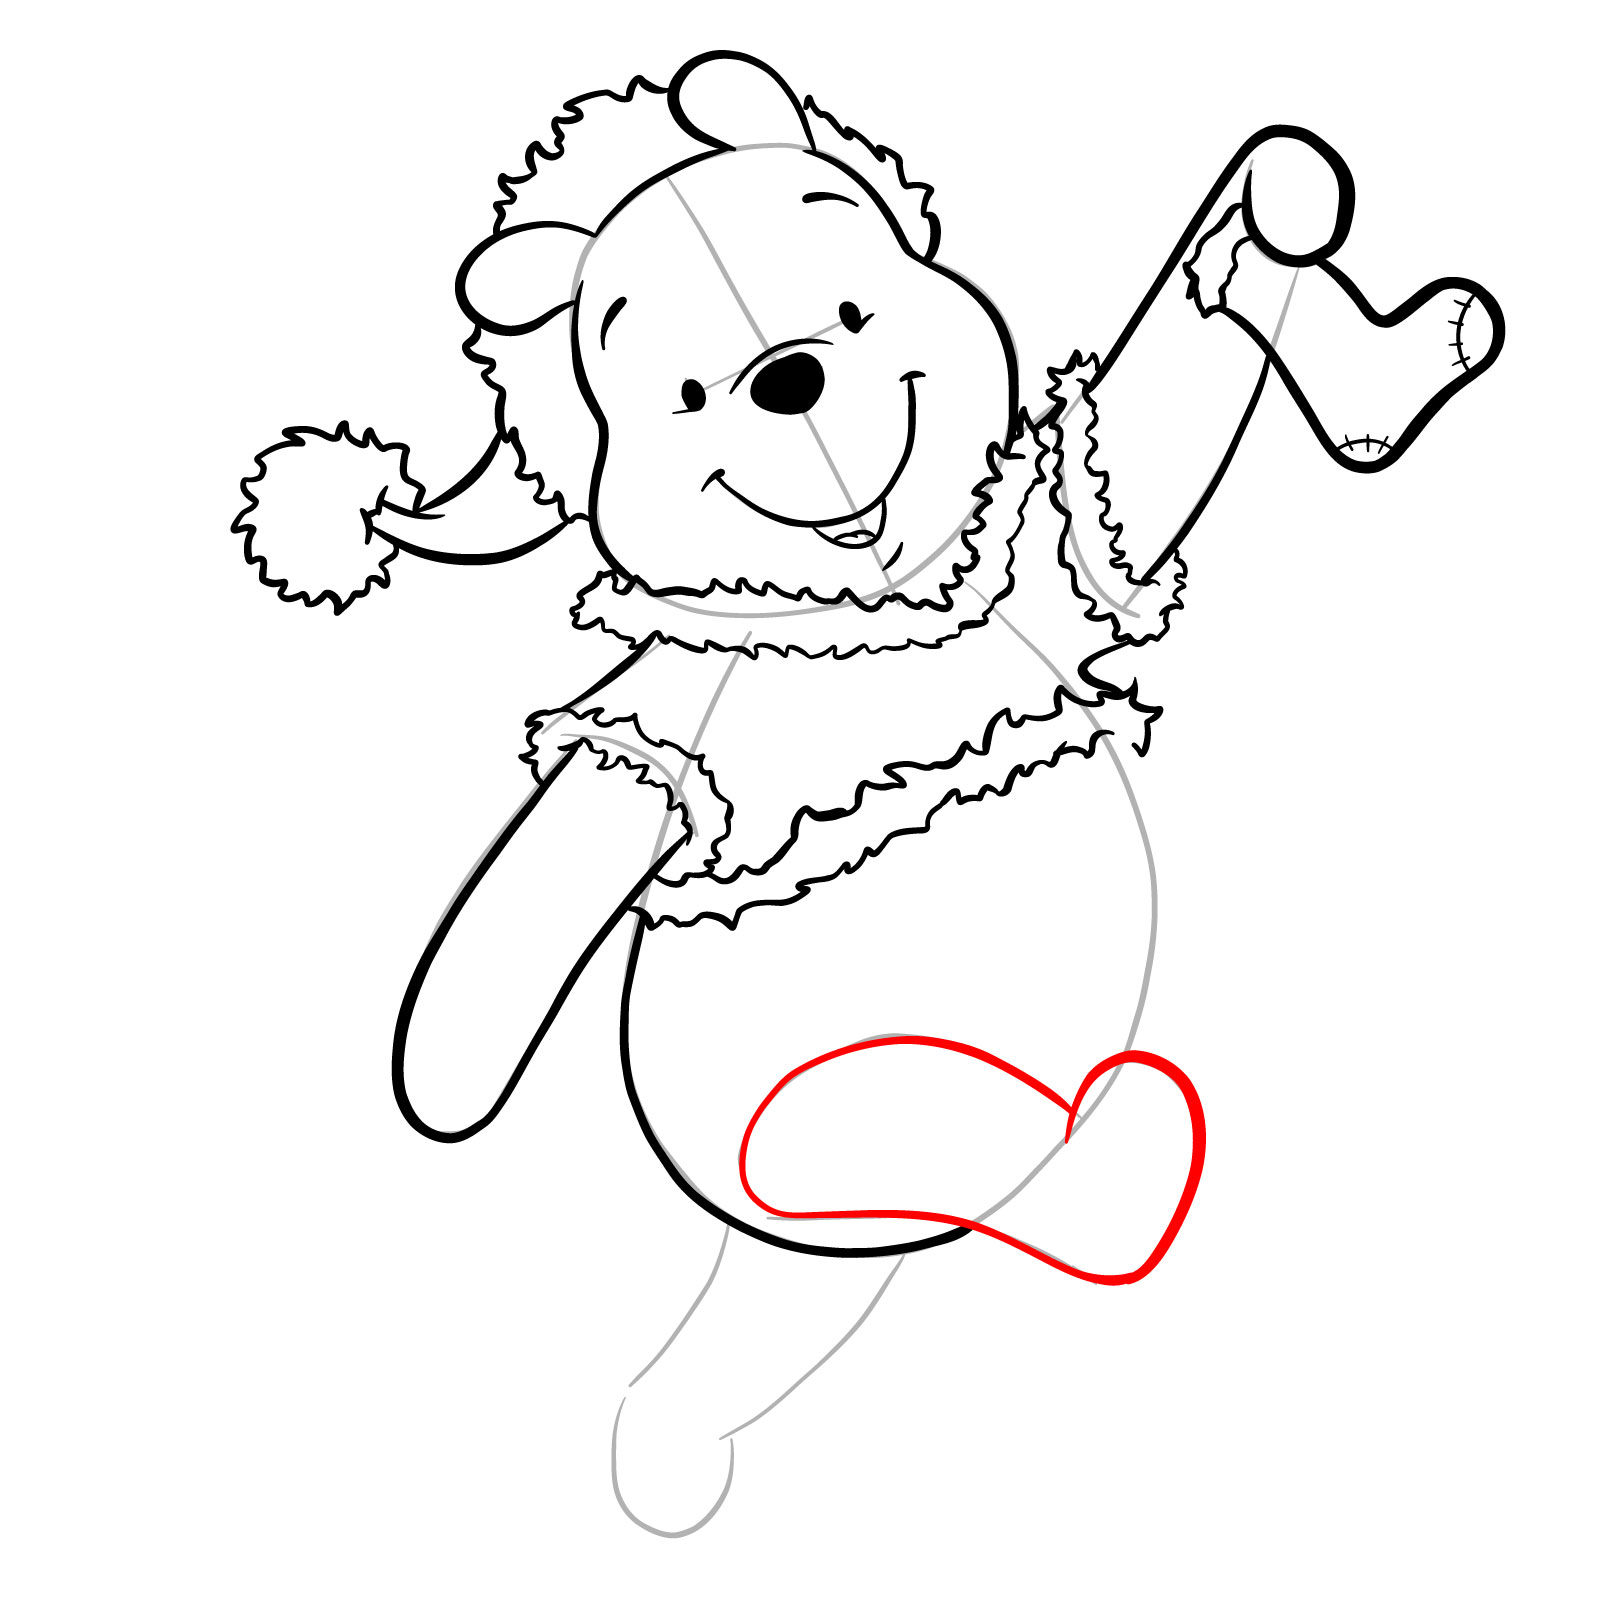 How to draw Winnie-the-Pooh Christmas style - step 24